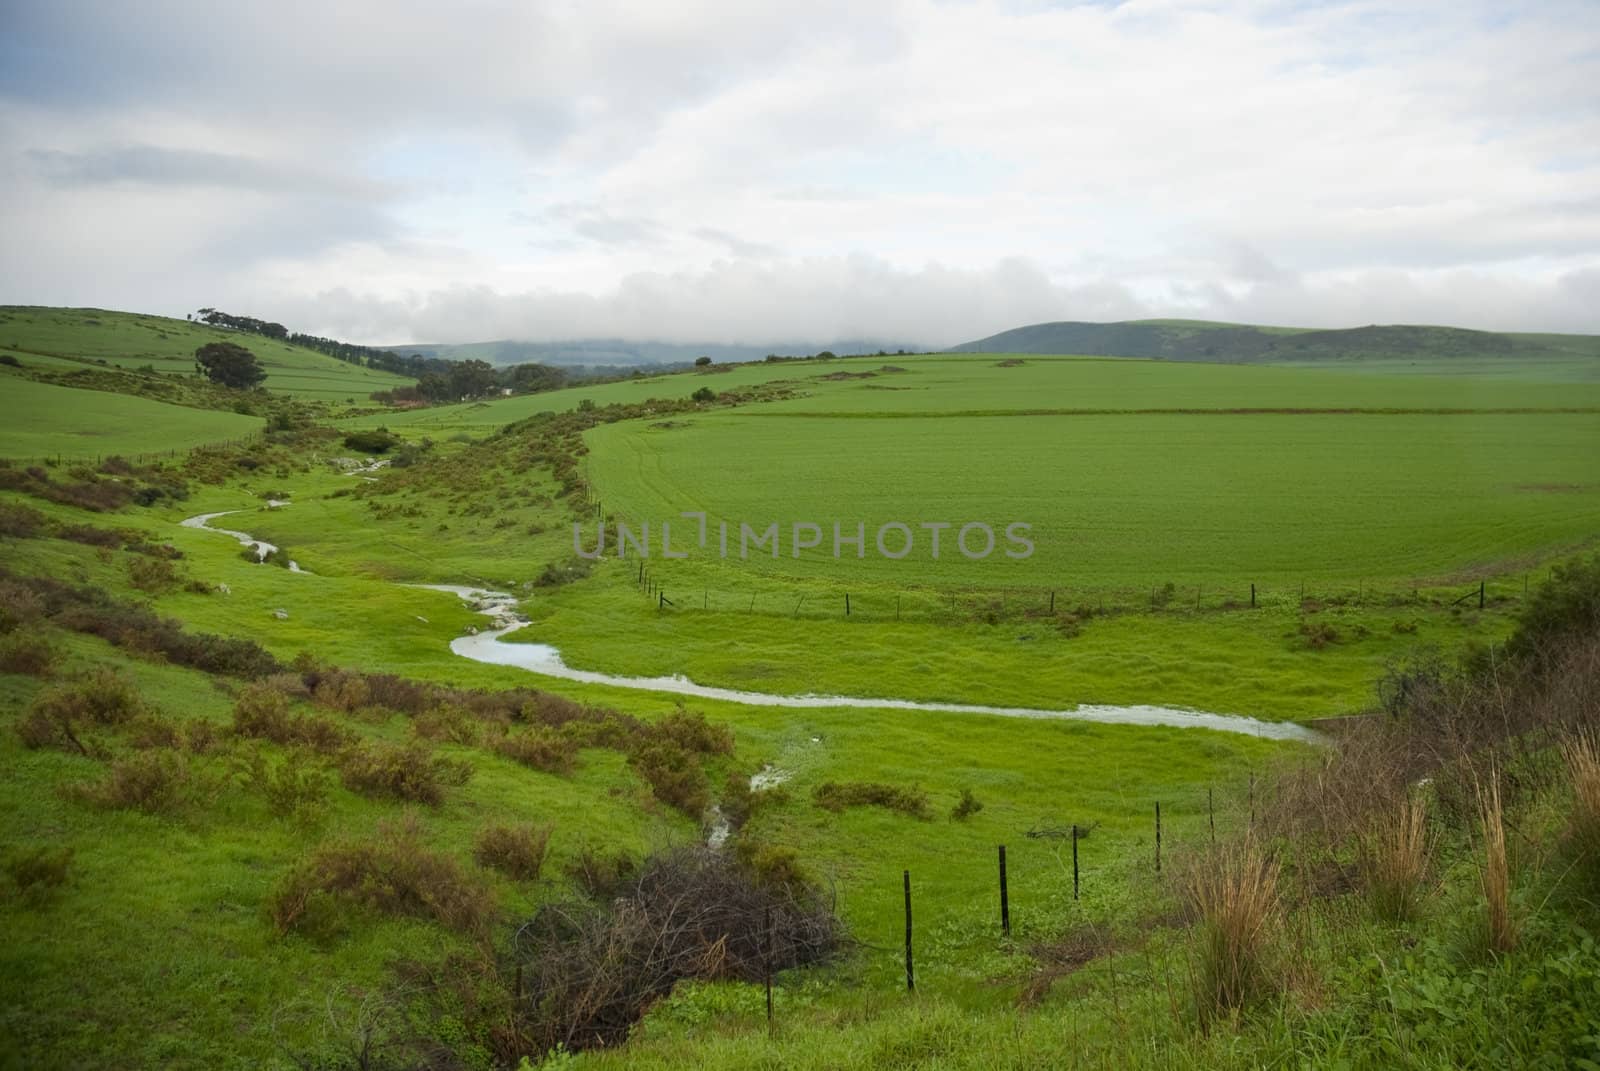 Green fields with stream running through on a cloudy day